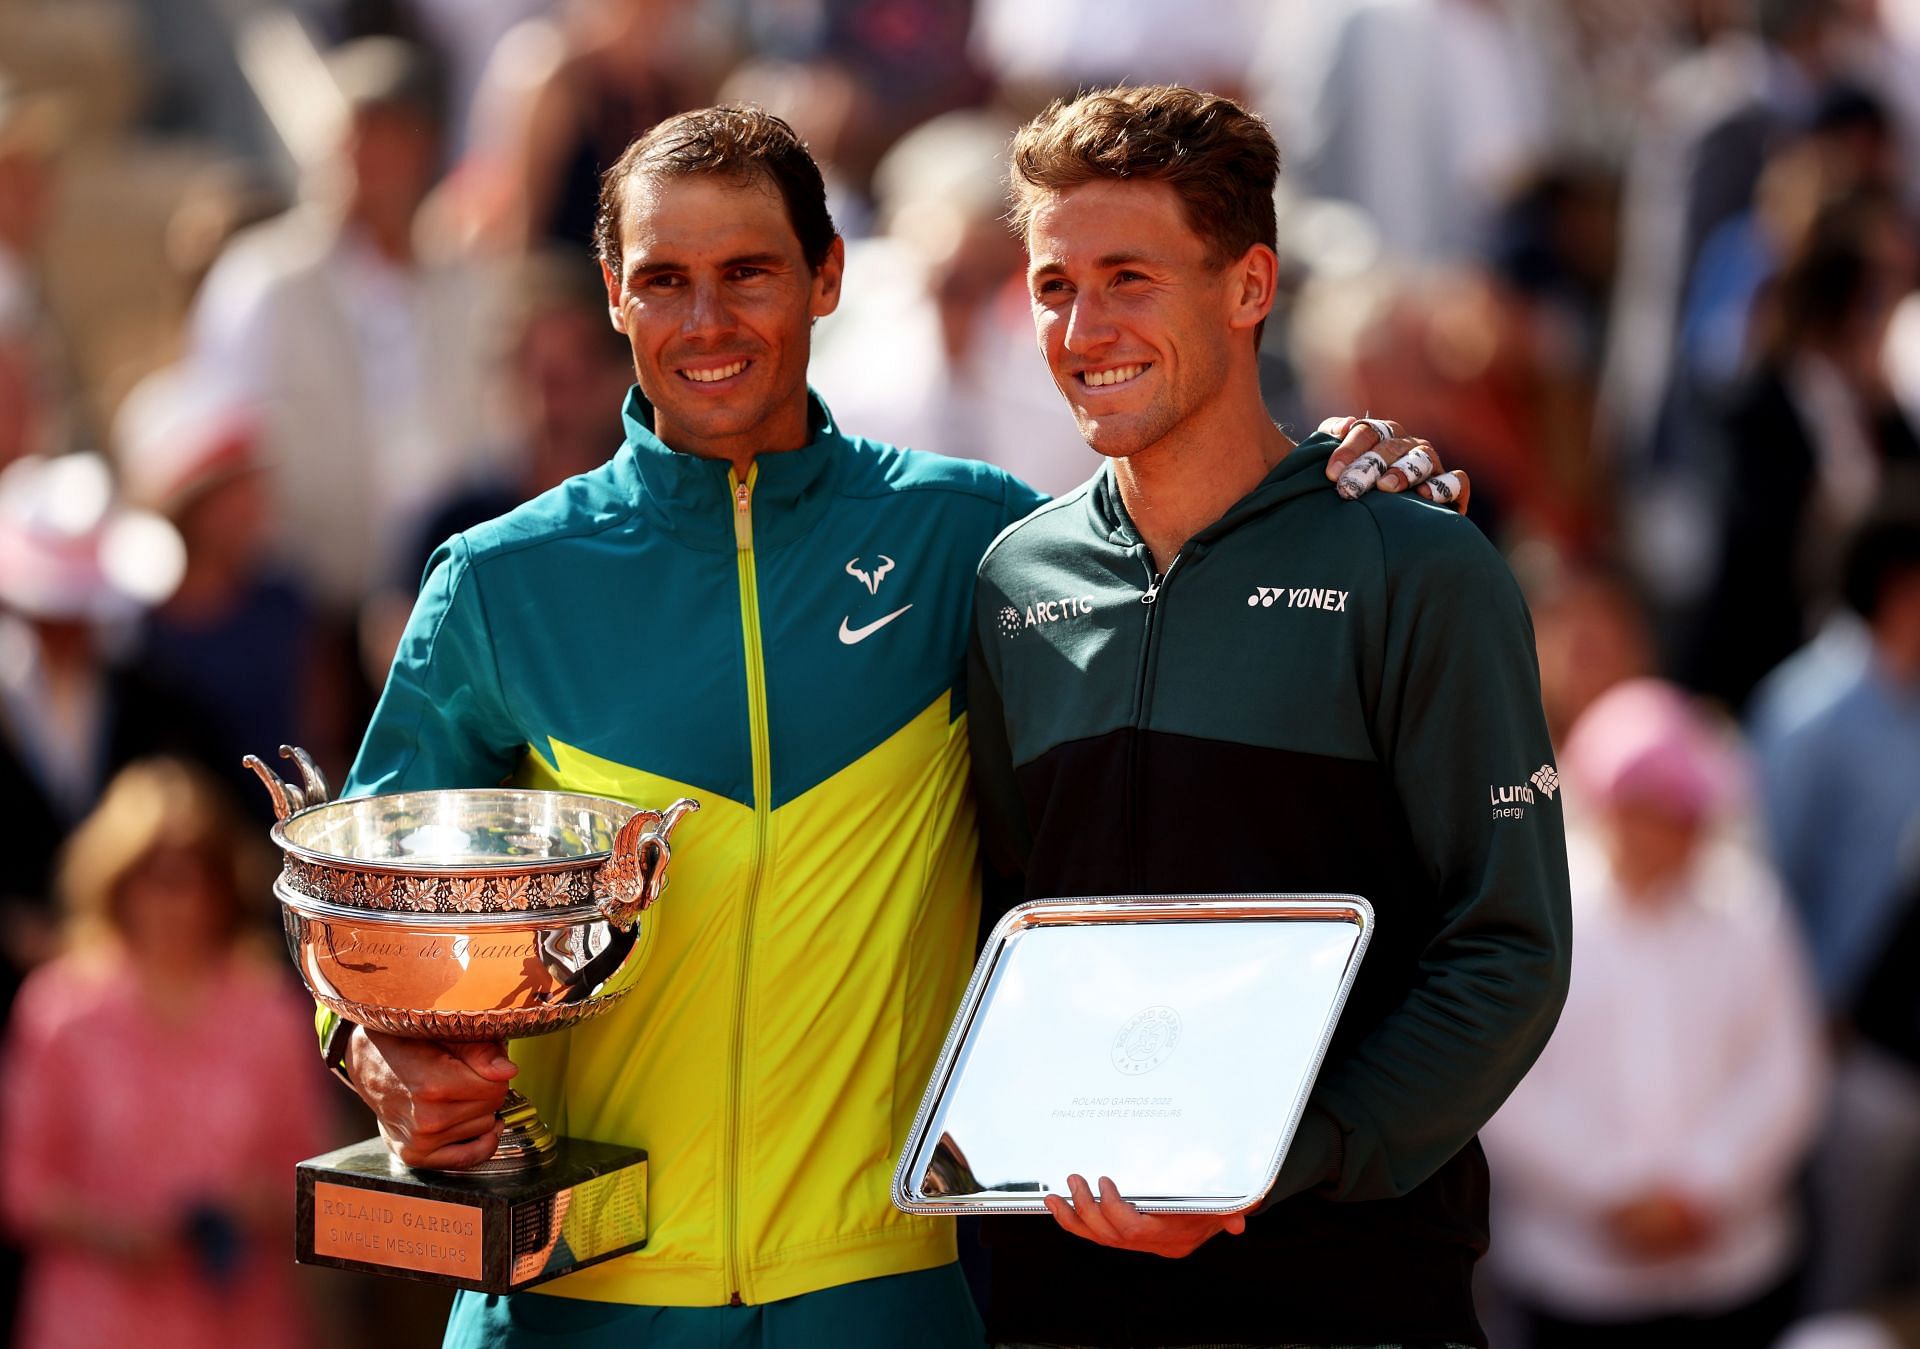 French Open champion Rafael Nadal and runner-up Casper Ruud pose with their respective trophies.